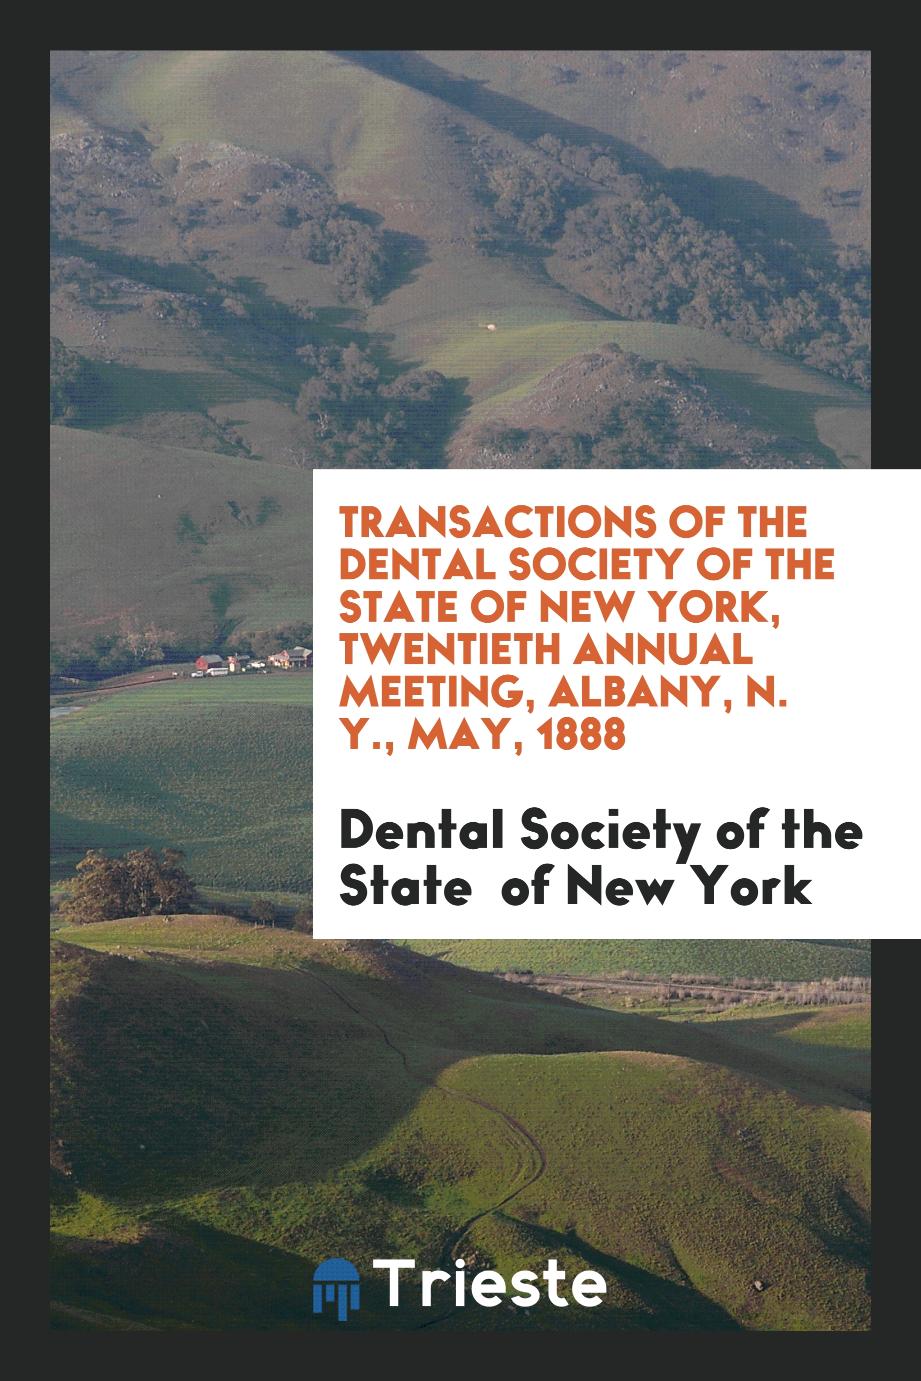 Transactions of the Dental Society of the State of New York, Twentieth Annual Meeting, Albany, N. Y., May, 1888